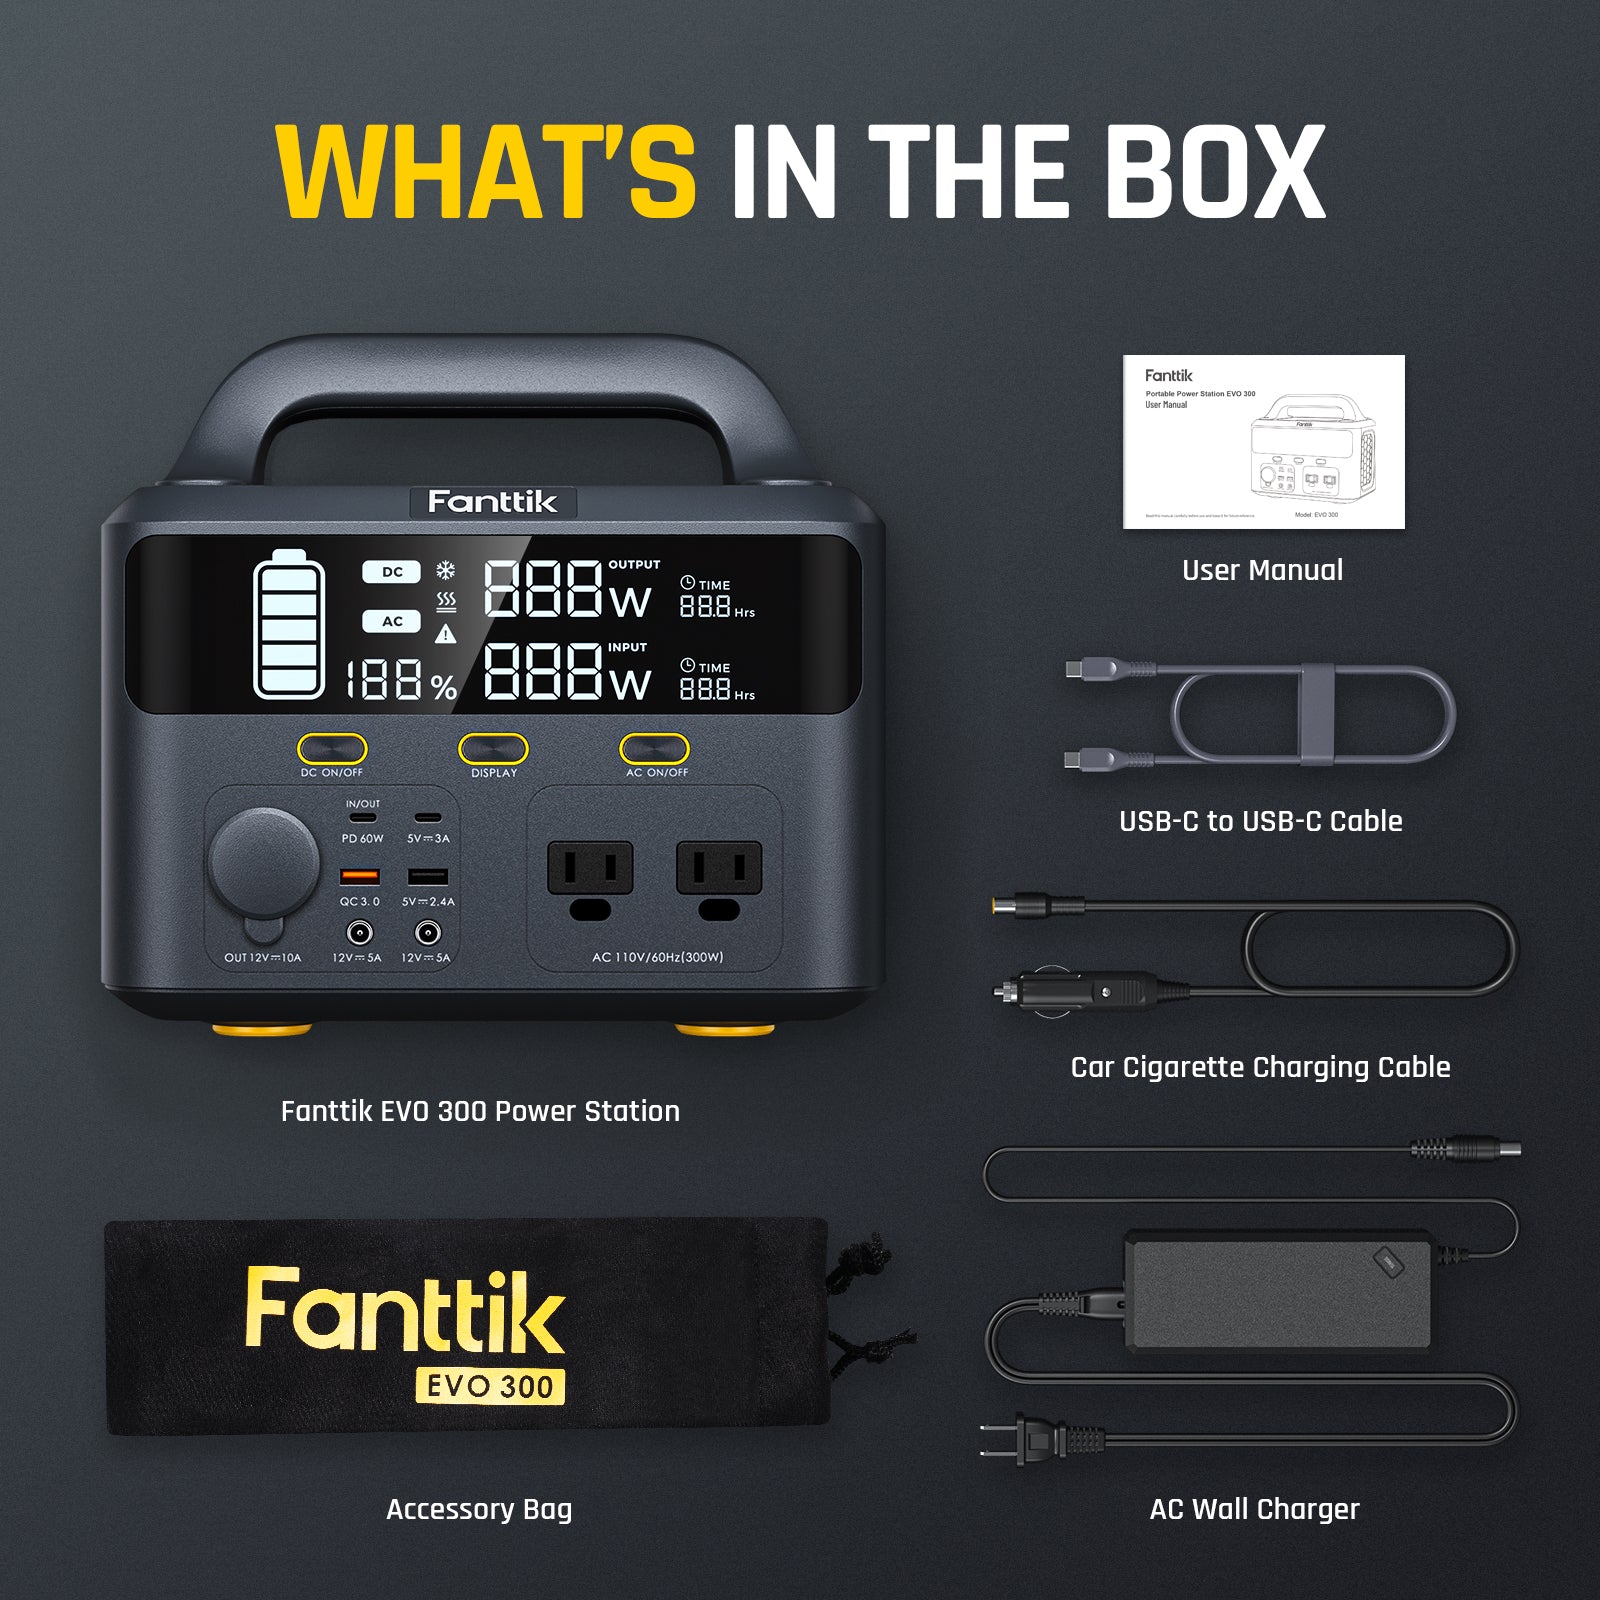 The package includes Fanttik Power Station, users mannual,USB cable,AC Wall Charger